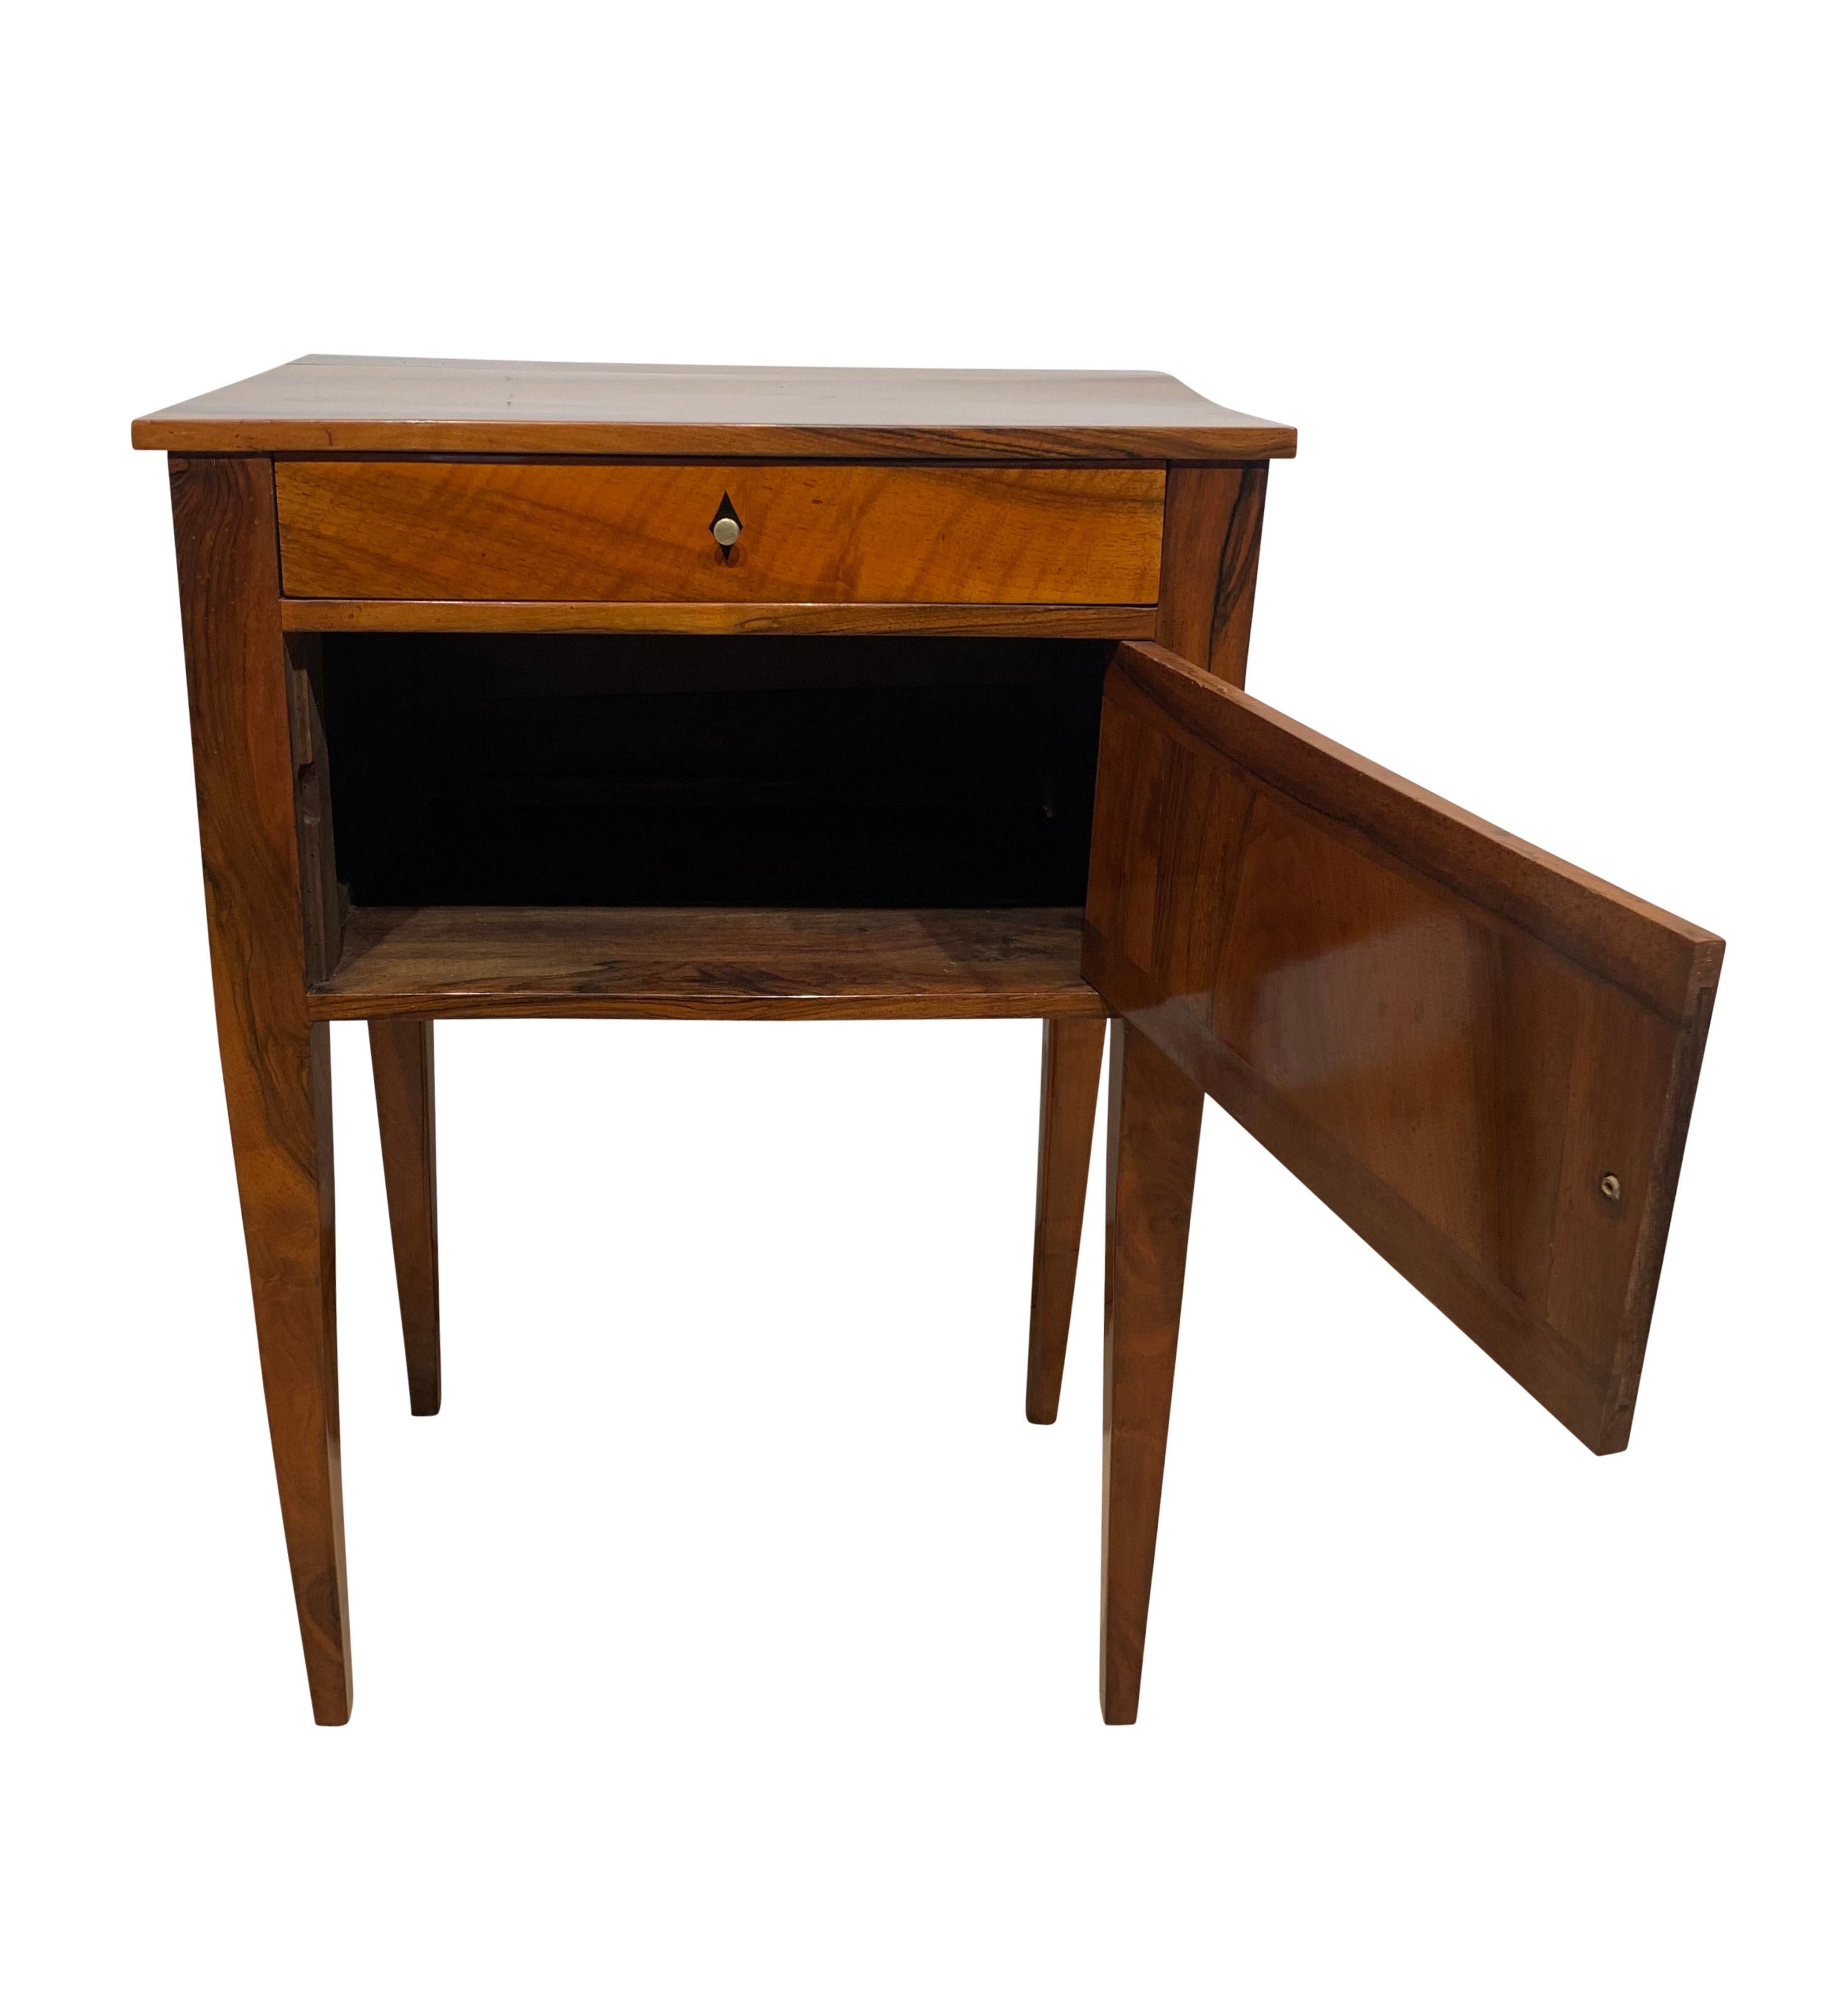 Simple, antique small furniture / pillar cabinet / Side table from Biedermeier period / french Restauration around 1820.

Solid walnut, french polished with shellac hand rubbed.
One door and one drawer. Conical square tapered legs.
Brass knobs